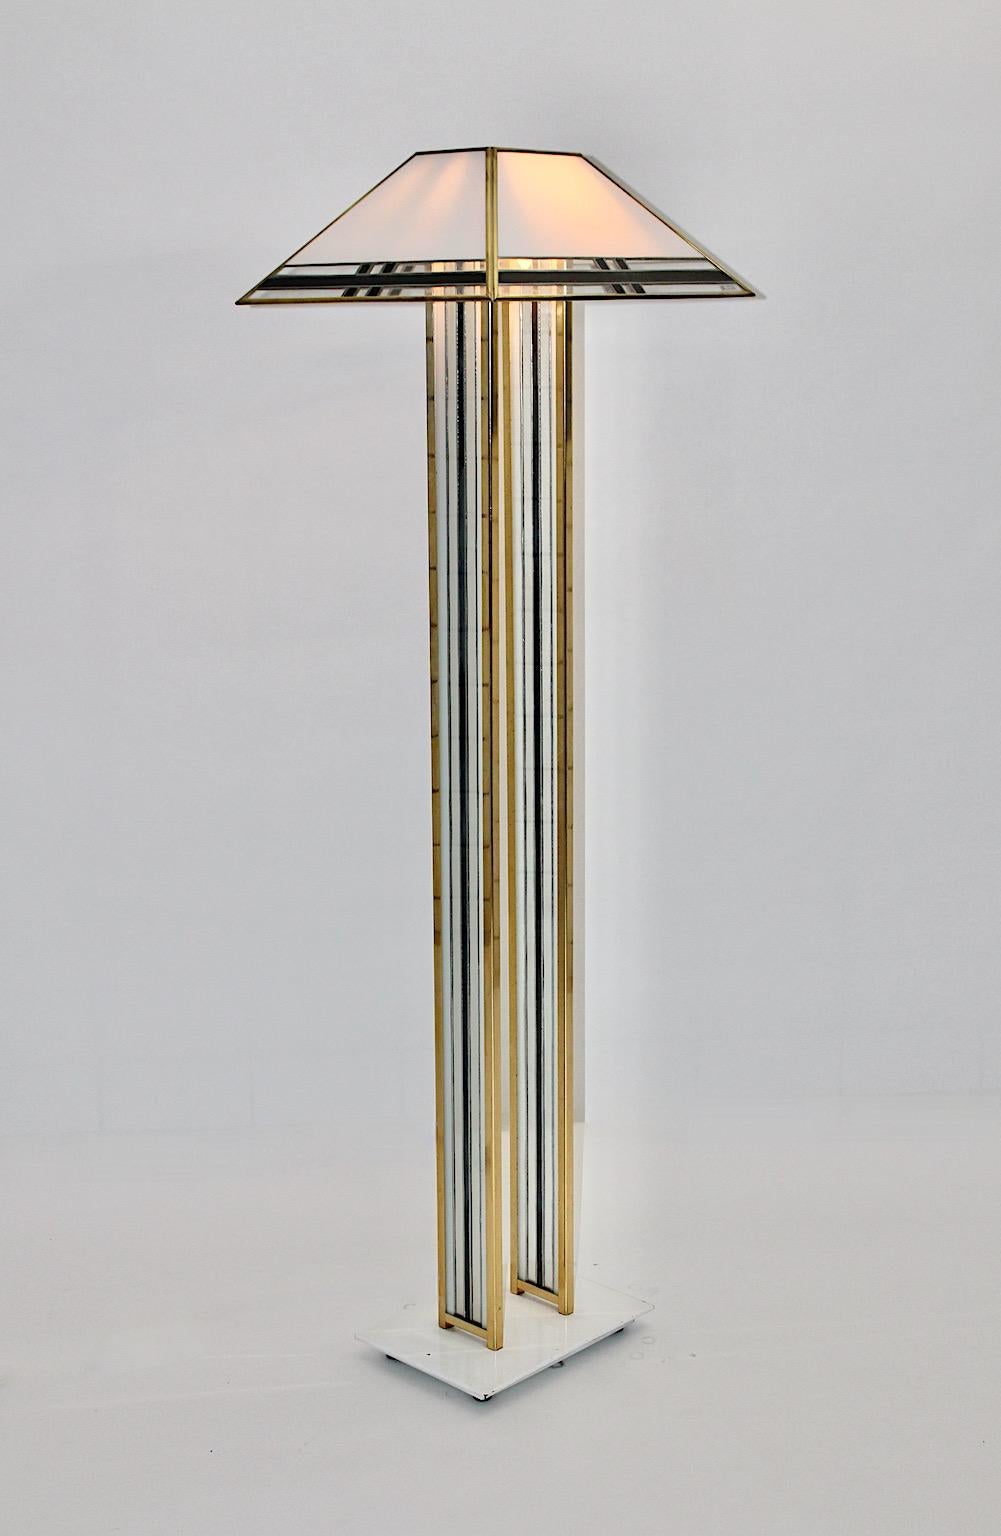 Hollywood Regency Modern Metal Lucite Vintage Floor Lamp Albano Poli for Poliarte, 1970s, Italy For Sale